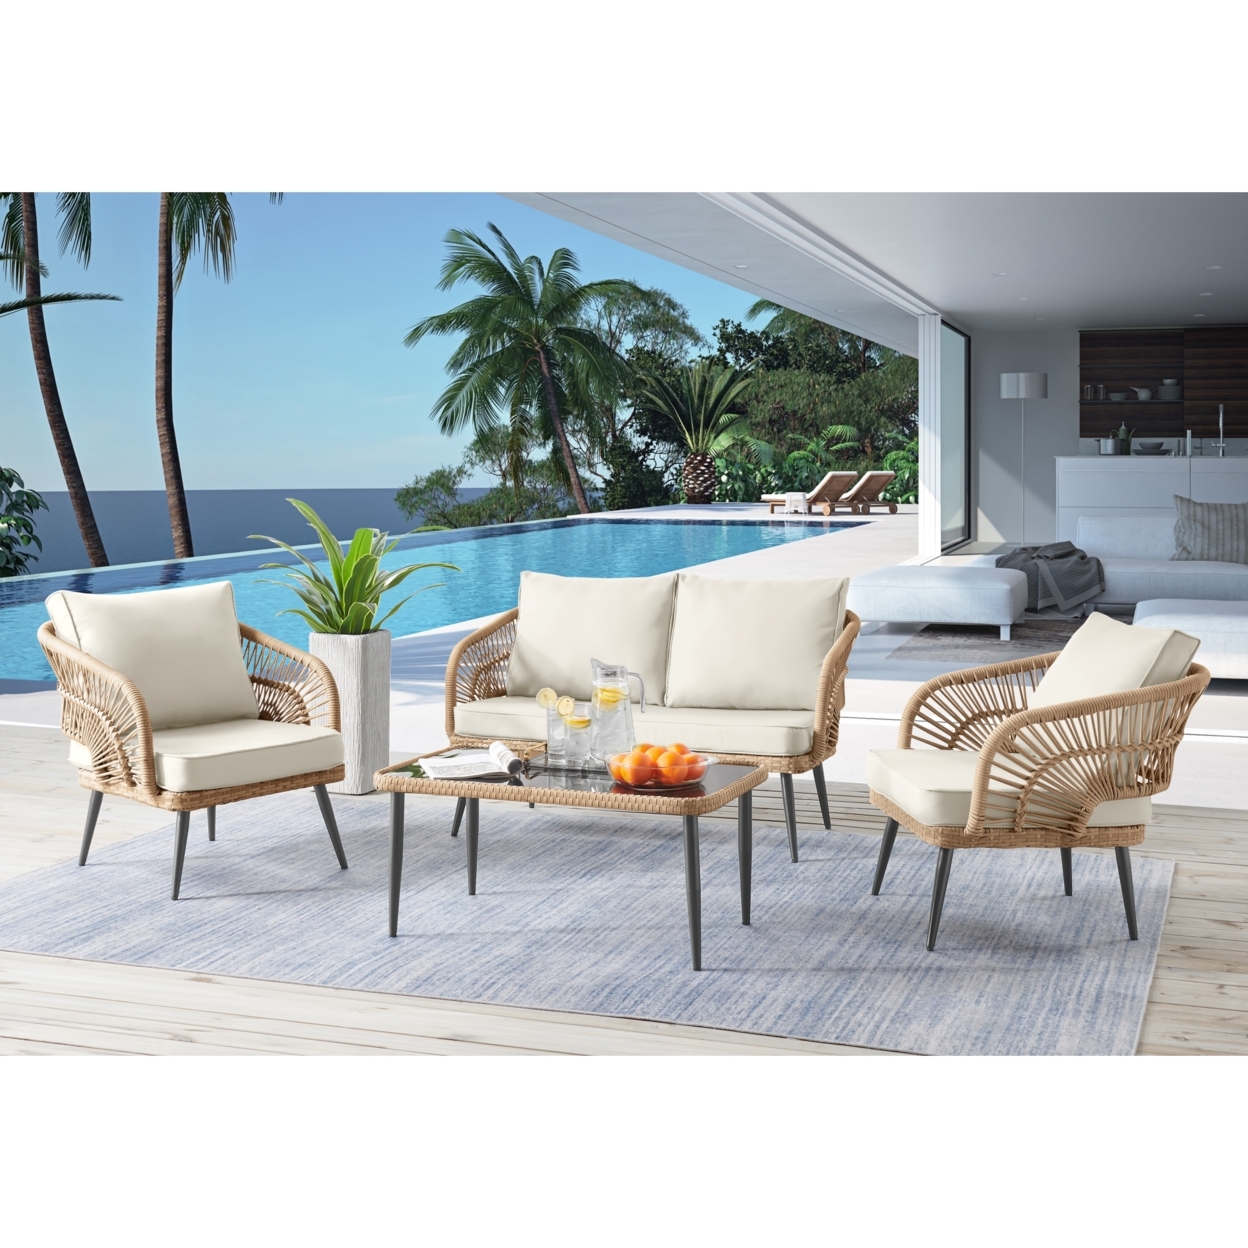 Javien Outdoor Set -All-Weather Faux Rattan Wicker Design, Removable And Washable Cushions - Teak/5 Seating